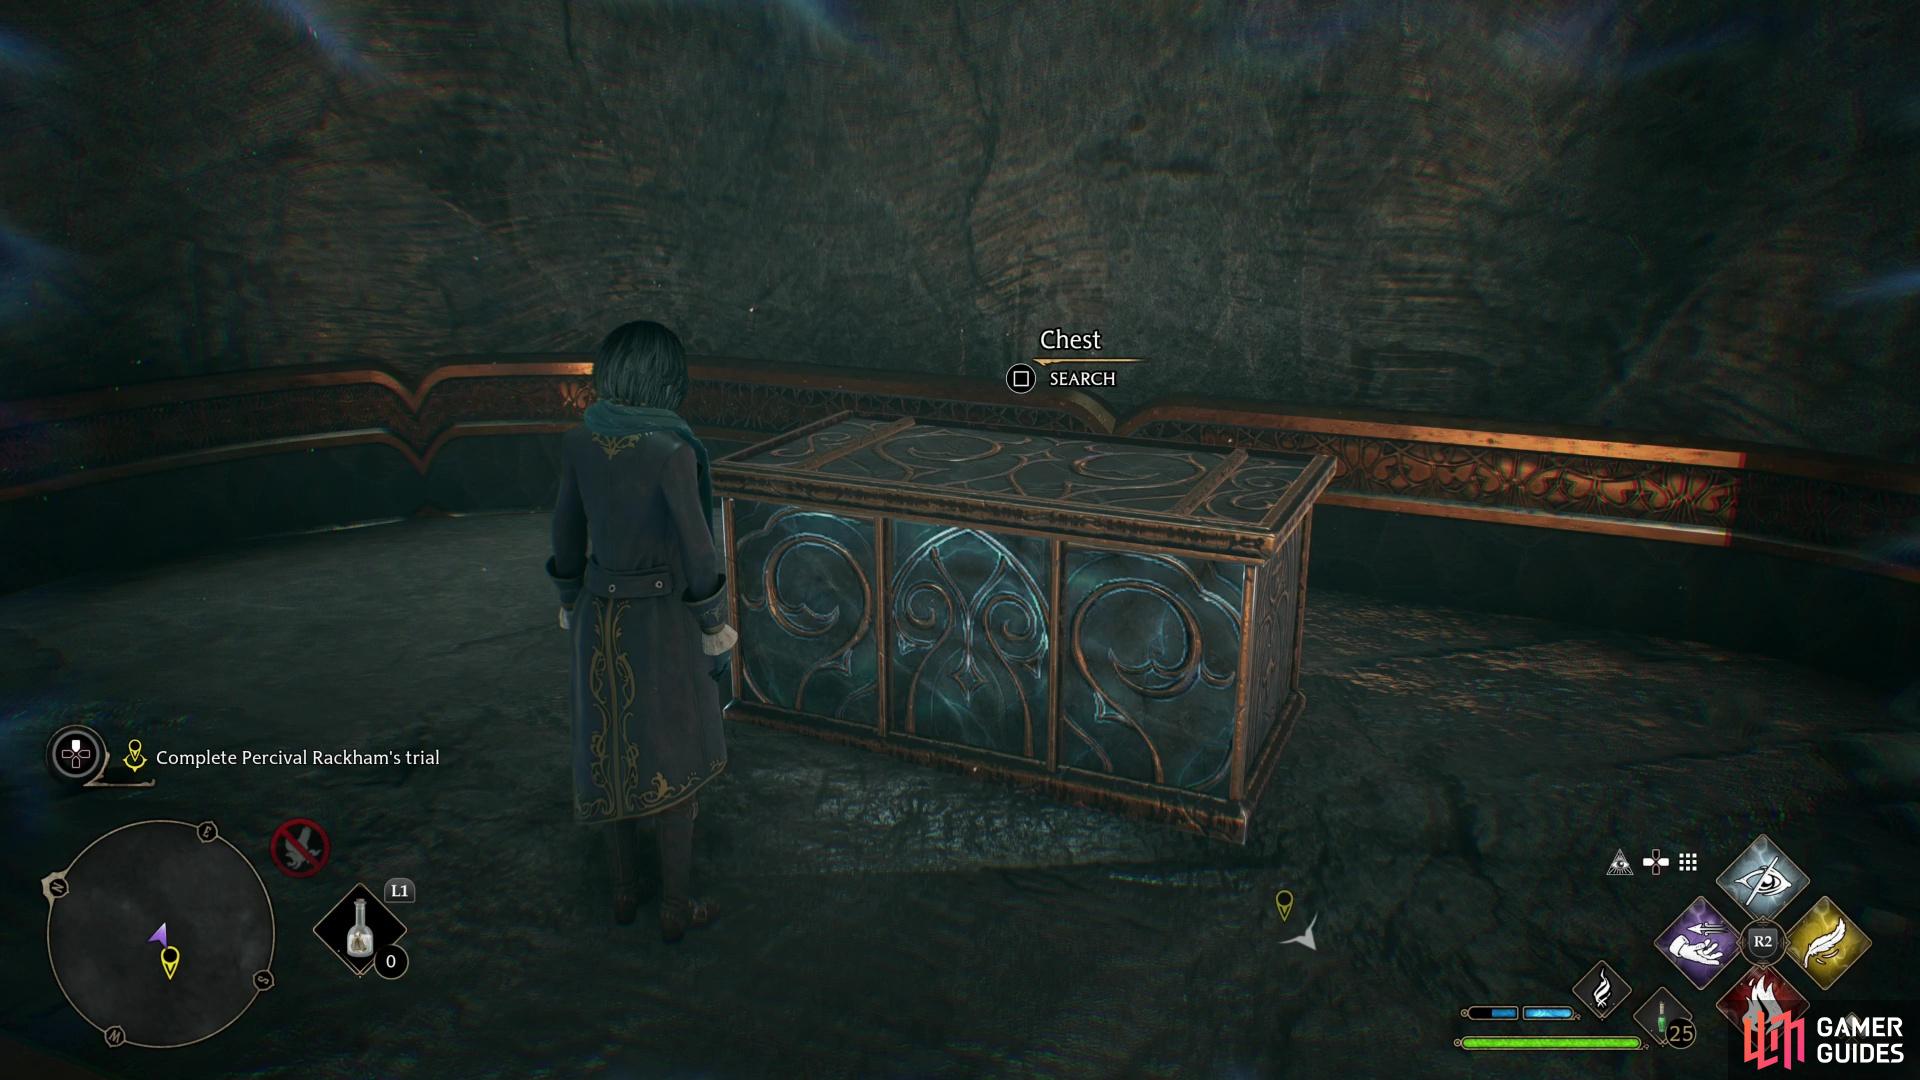 then loot a large chest.